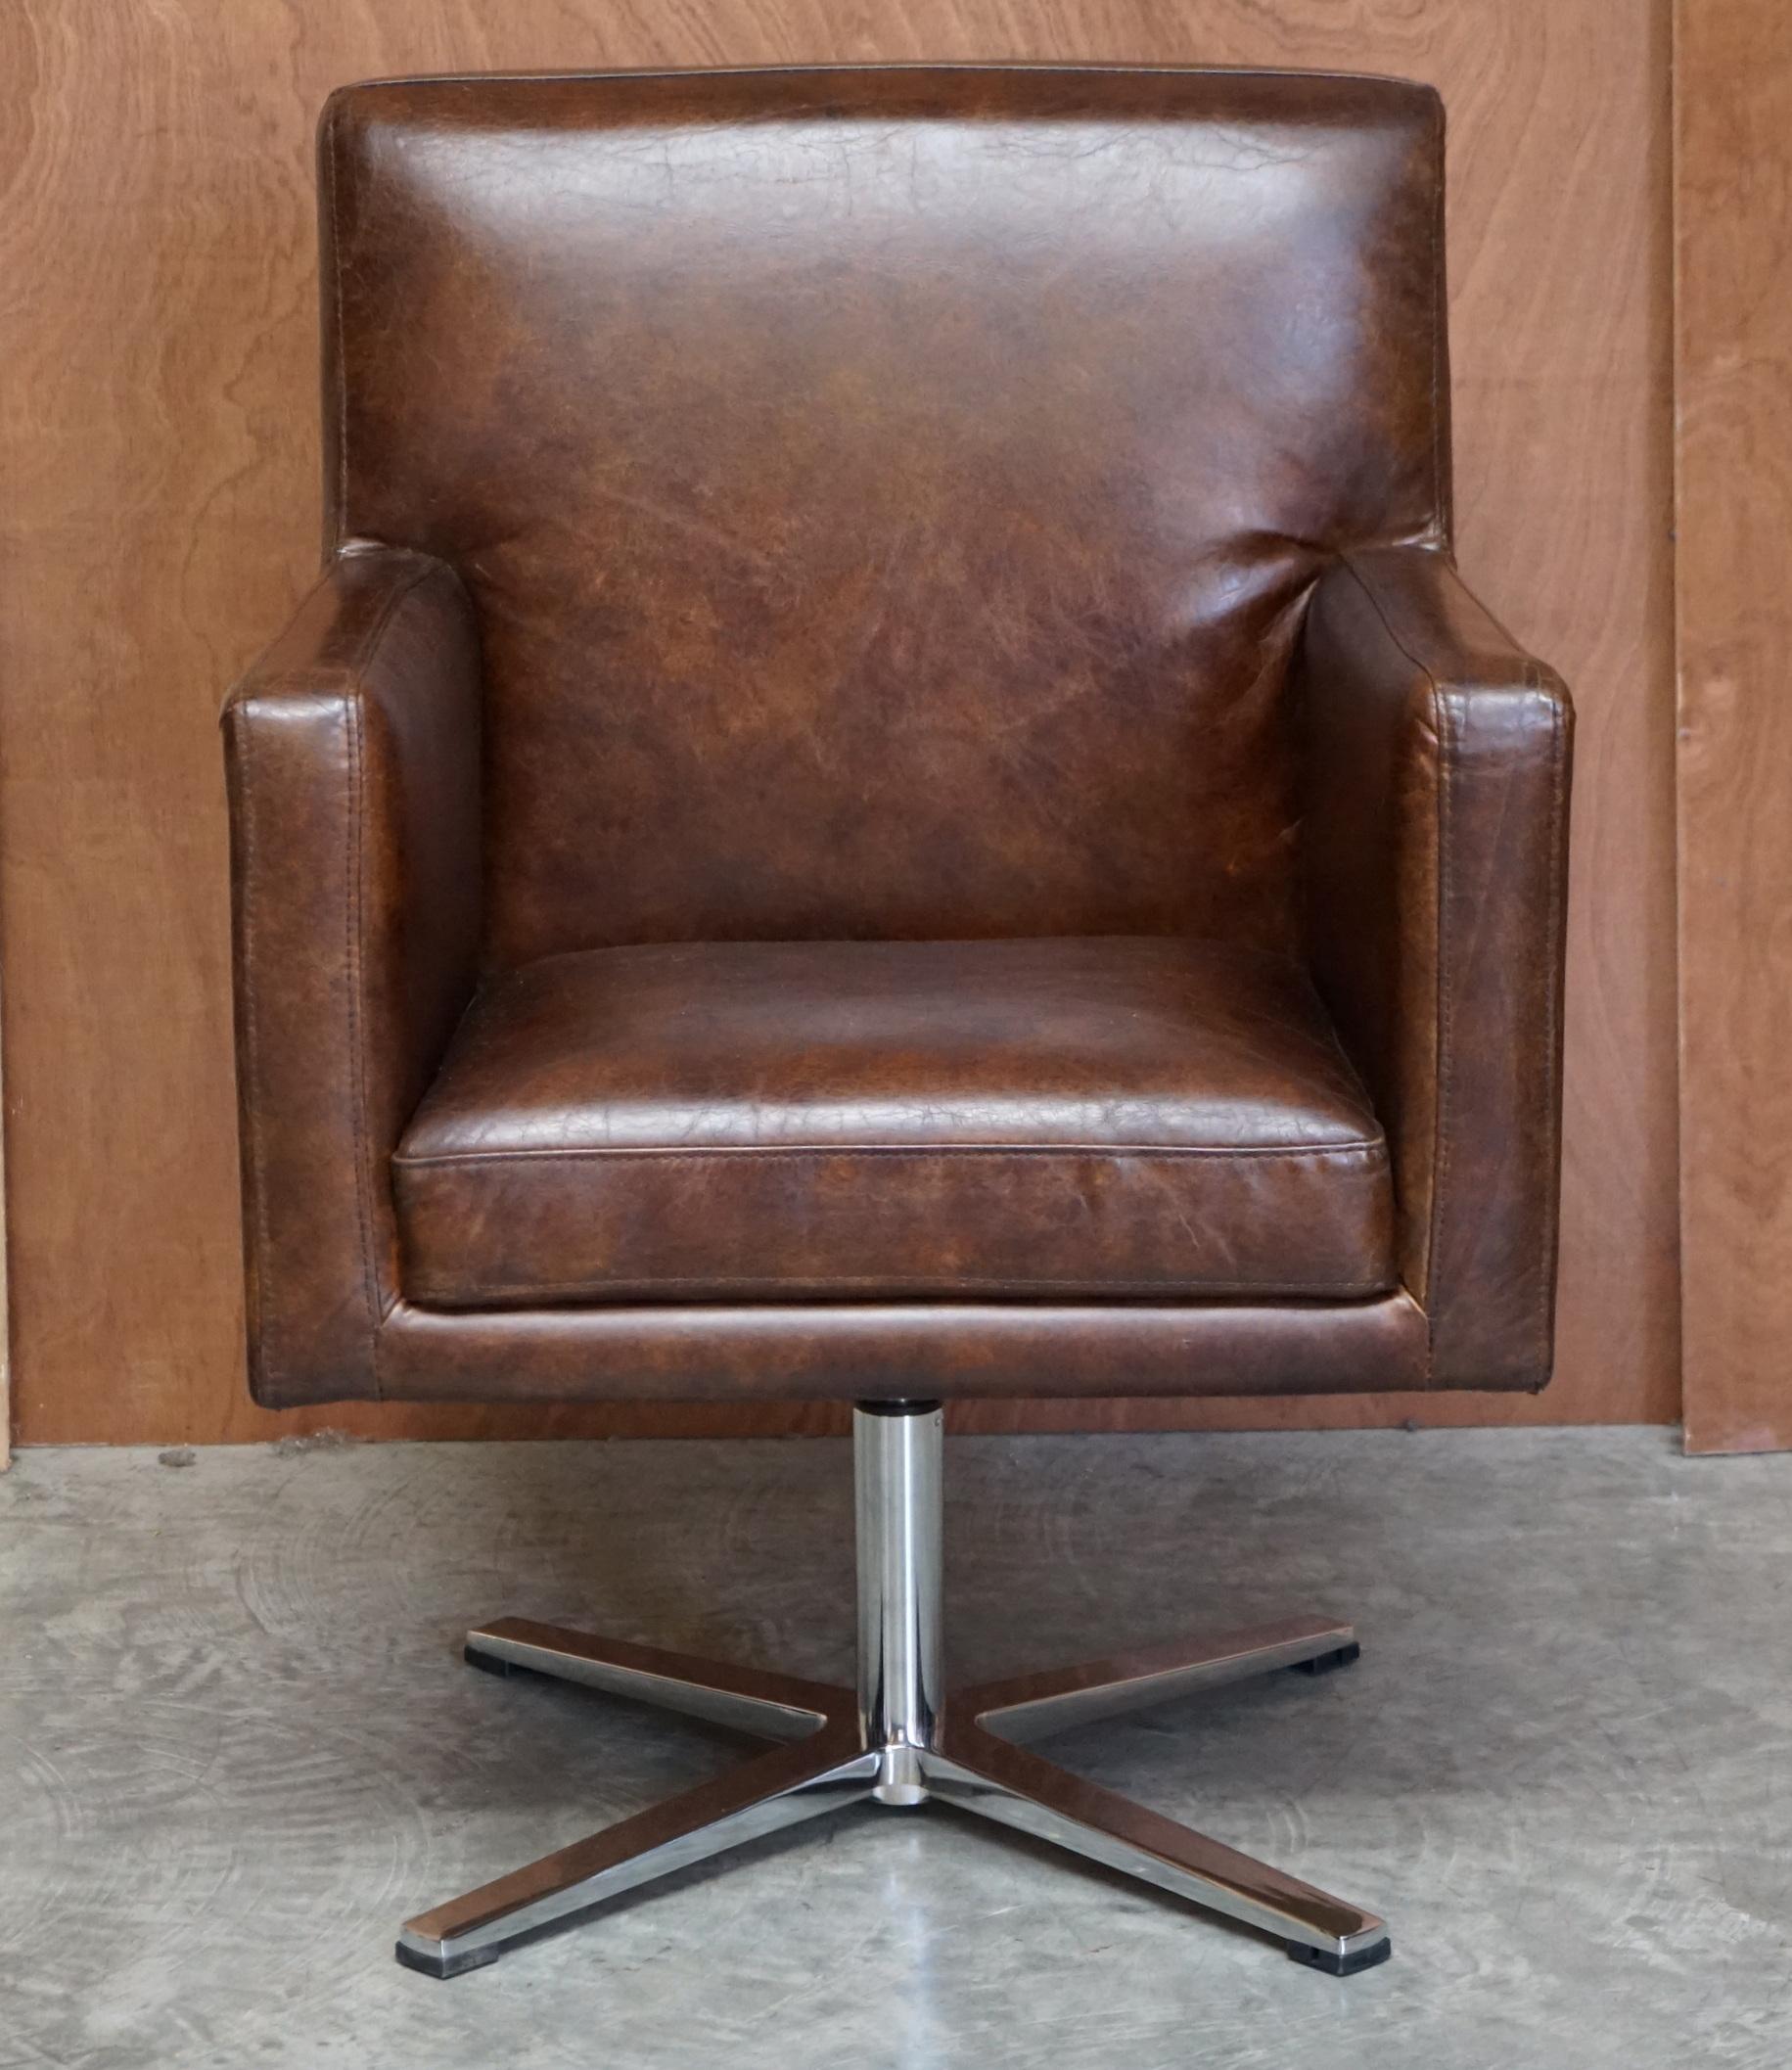 We are delighted to offer for sale 1 of 2 hand dyed vintage heritage brown leather aviator office chairs with aluminium riveted frames

This sale is for one chair with the option to purchase up to two

These are the ever popular aviator chairs, they